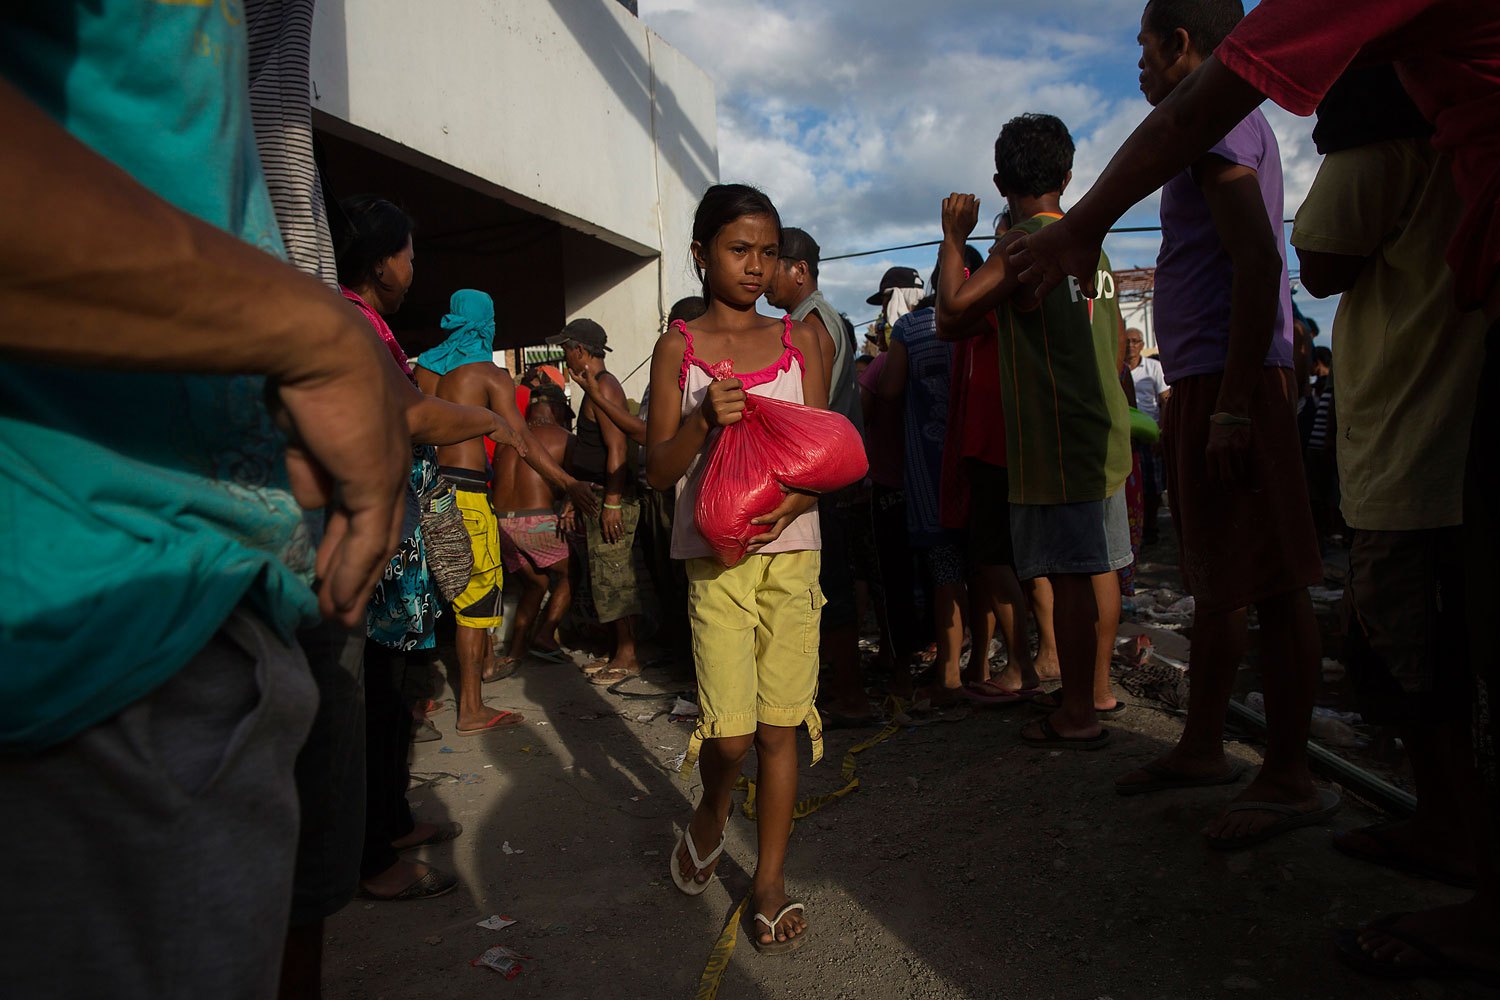 A girl affected by Typhoon Haiyan collects food aid in Tanauan, Philippines on November 19, 2013.